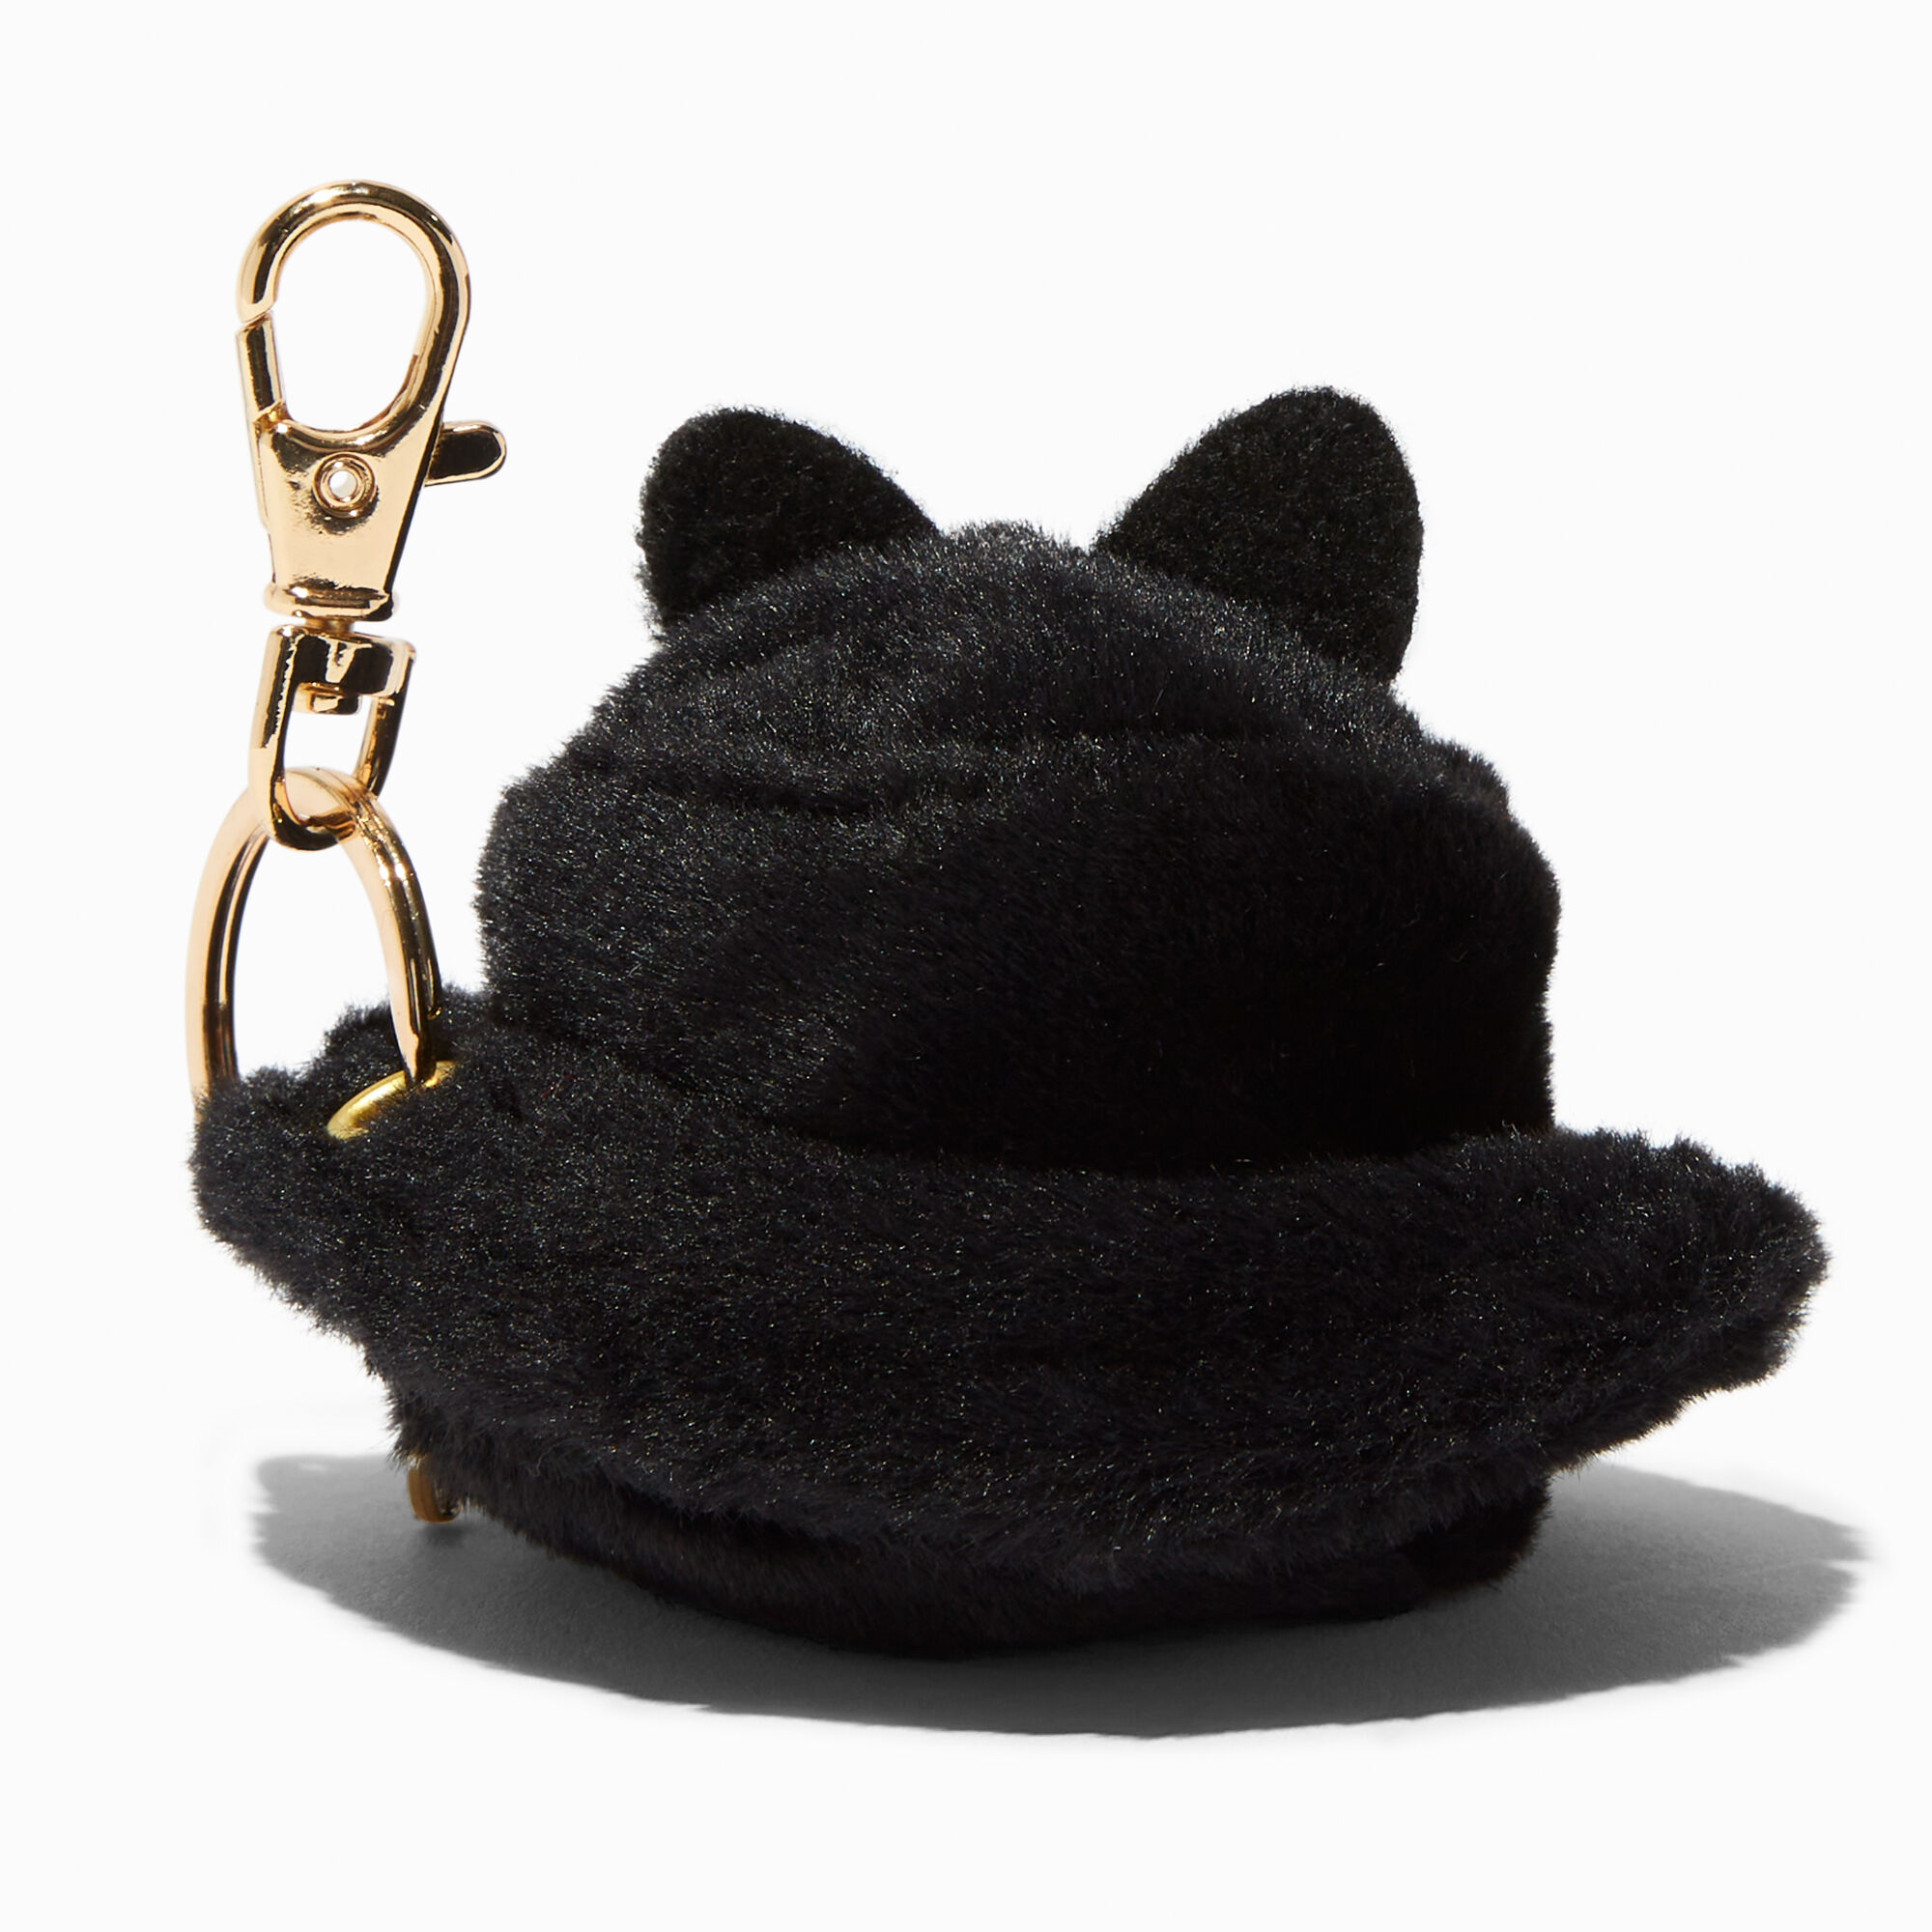 View Claires Cat Bucket Hat Keyring Black information